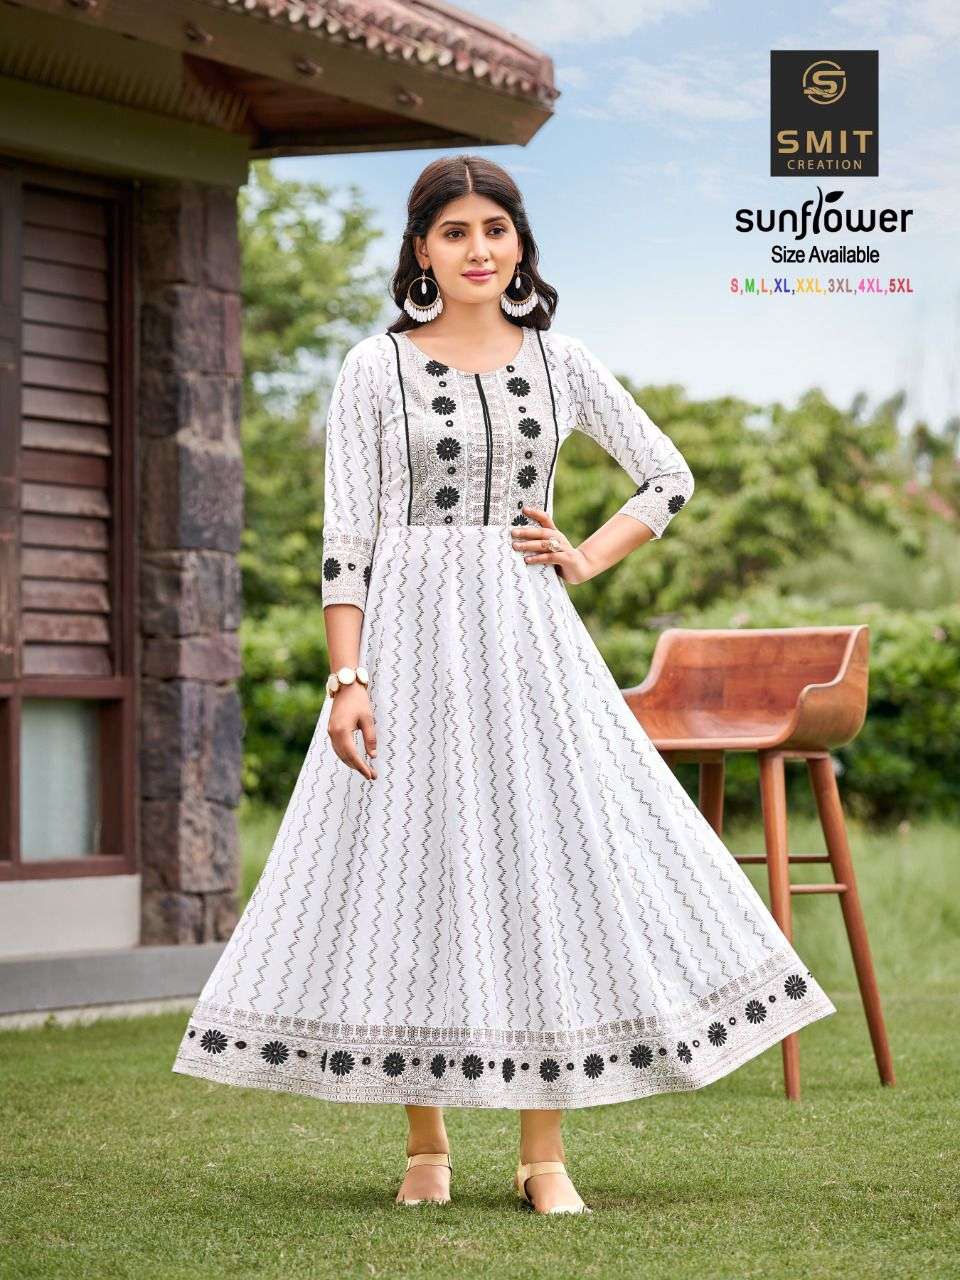 SUNFLOWER BY SMIT CREATION BRAND RAYON PRINT GOWN WITH HANDWORK WHOLESALER AND DEALER